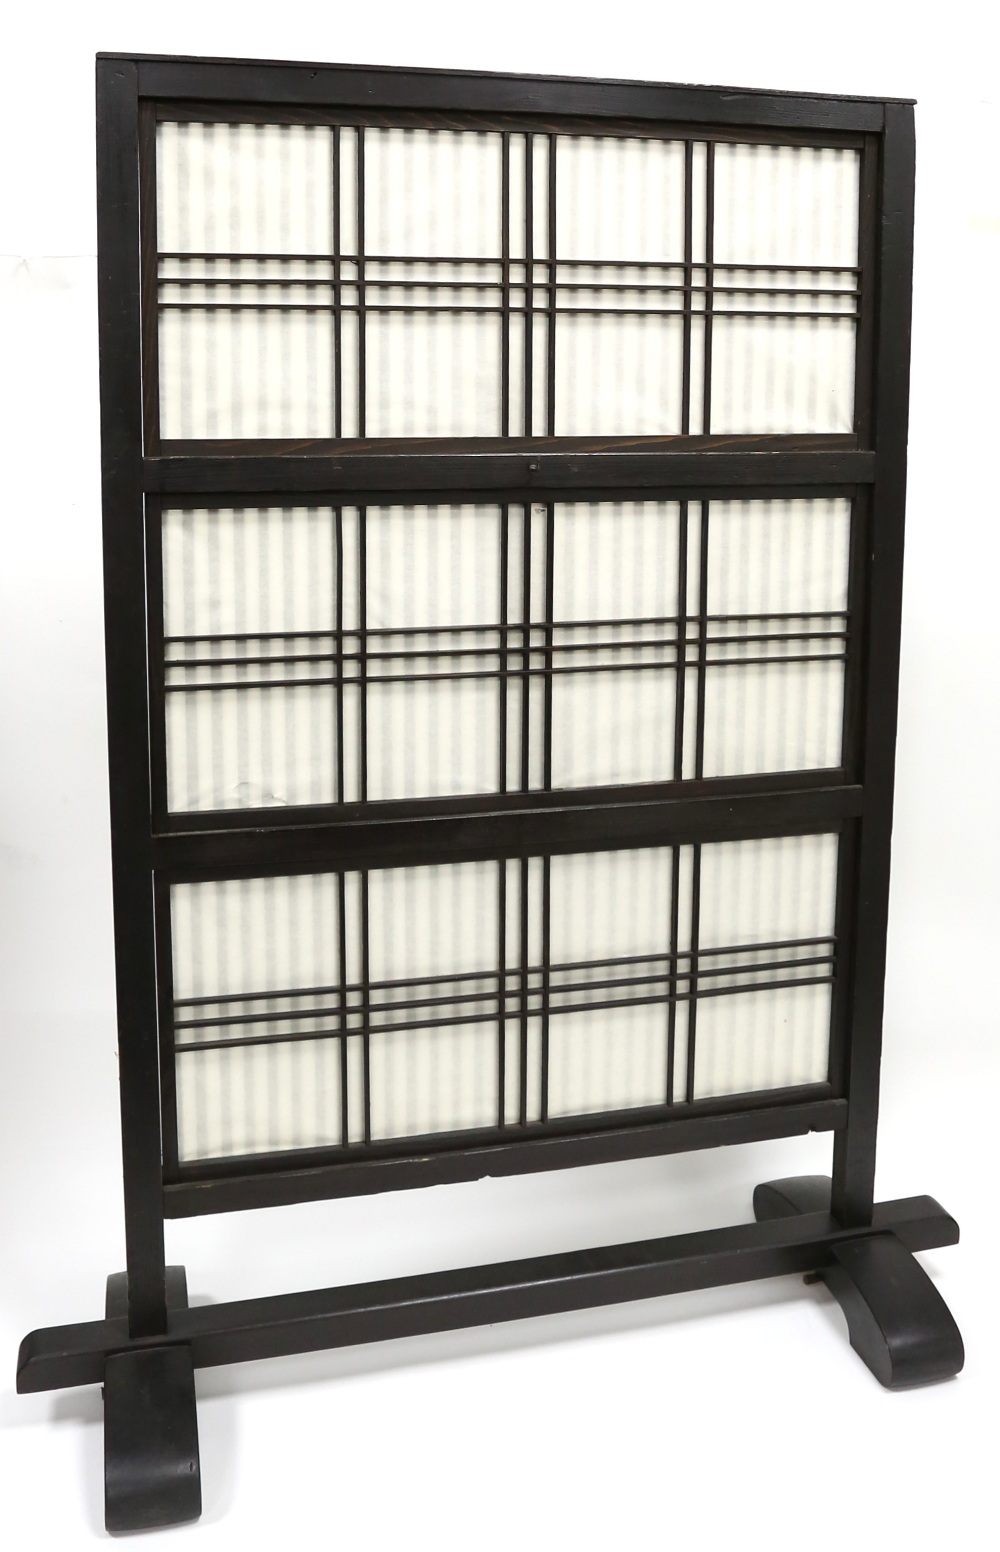 Japanese black lacquered screen 68W x 3D x 102H cm - Image 2 of 4